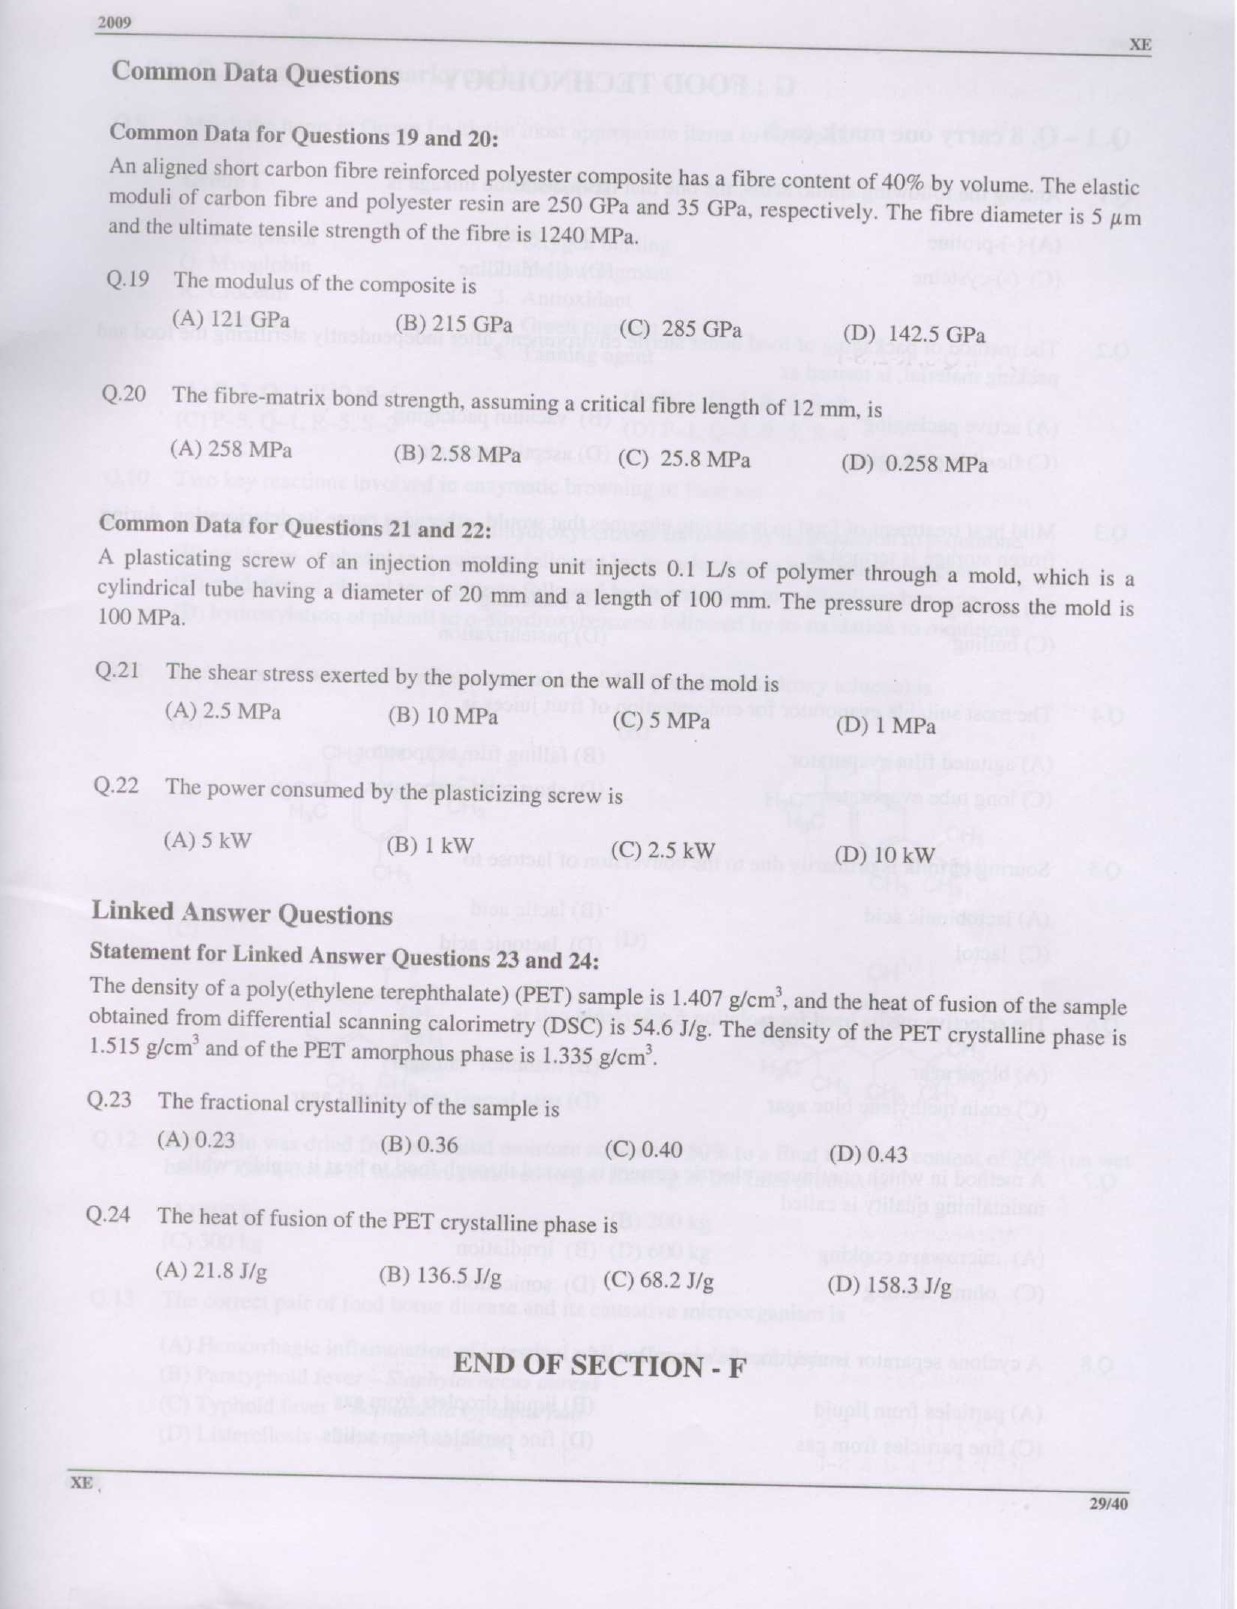 GATE Exam Question Paper 2009 Engineering Sciences 29